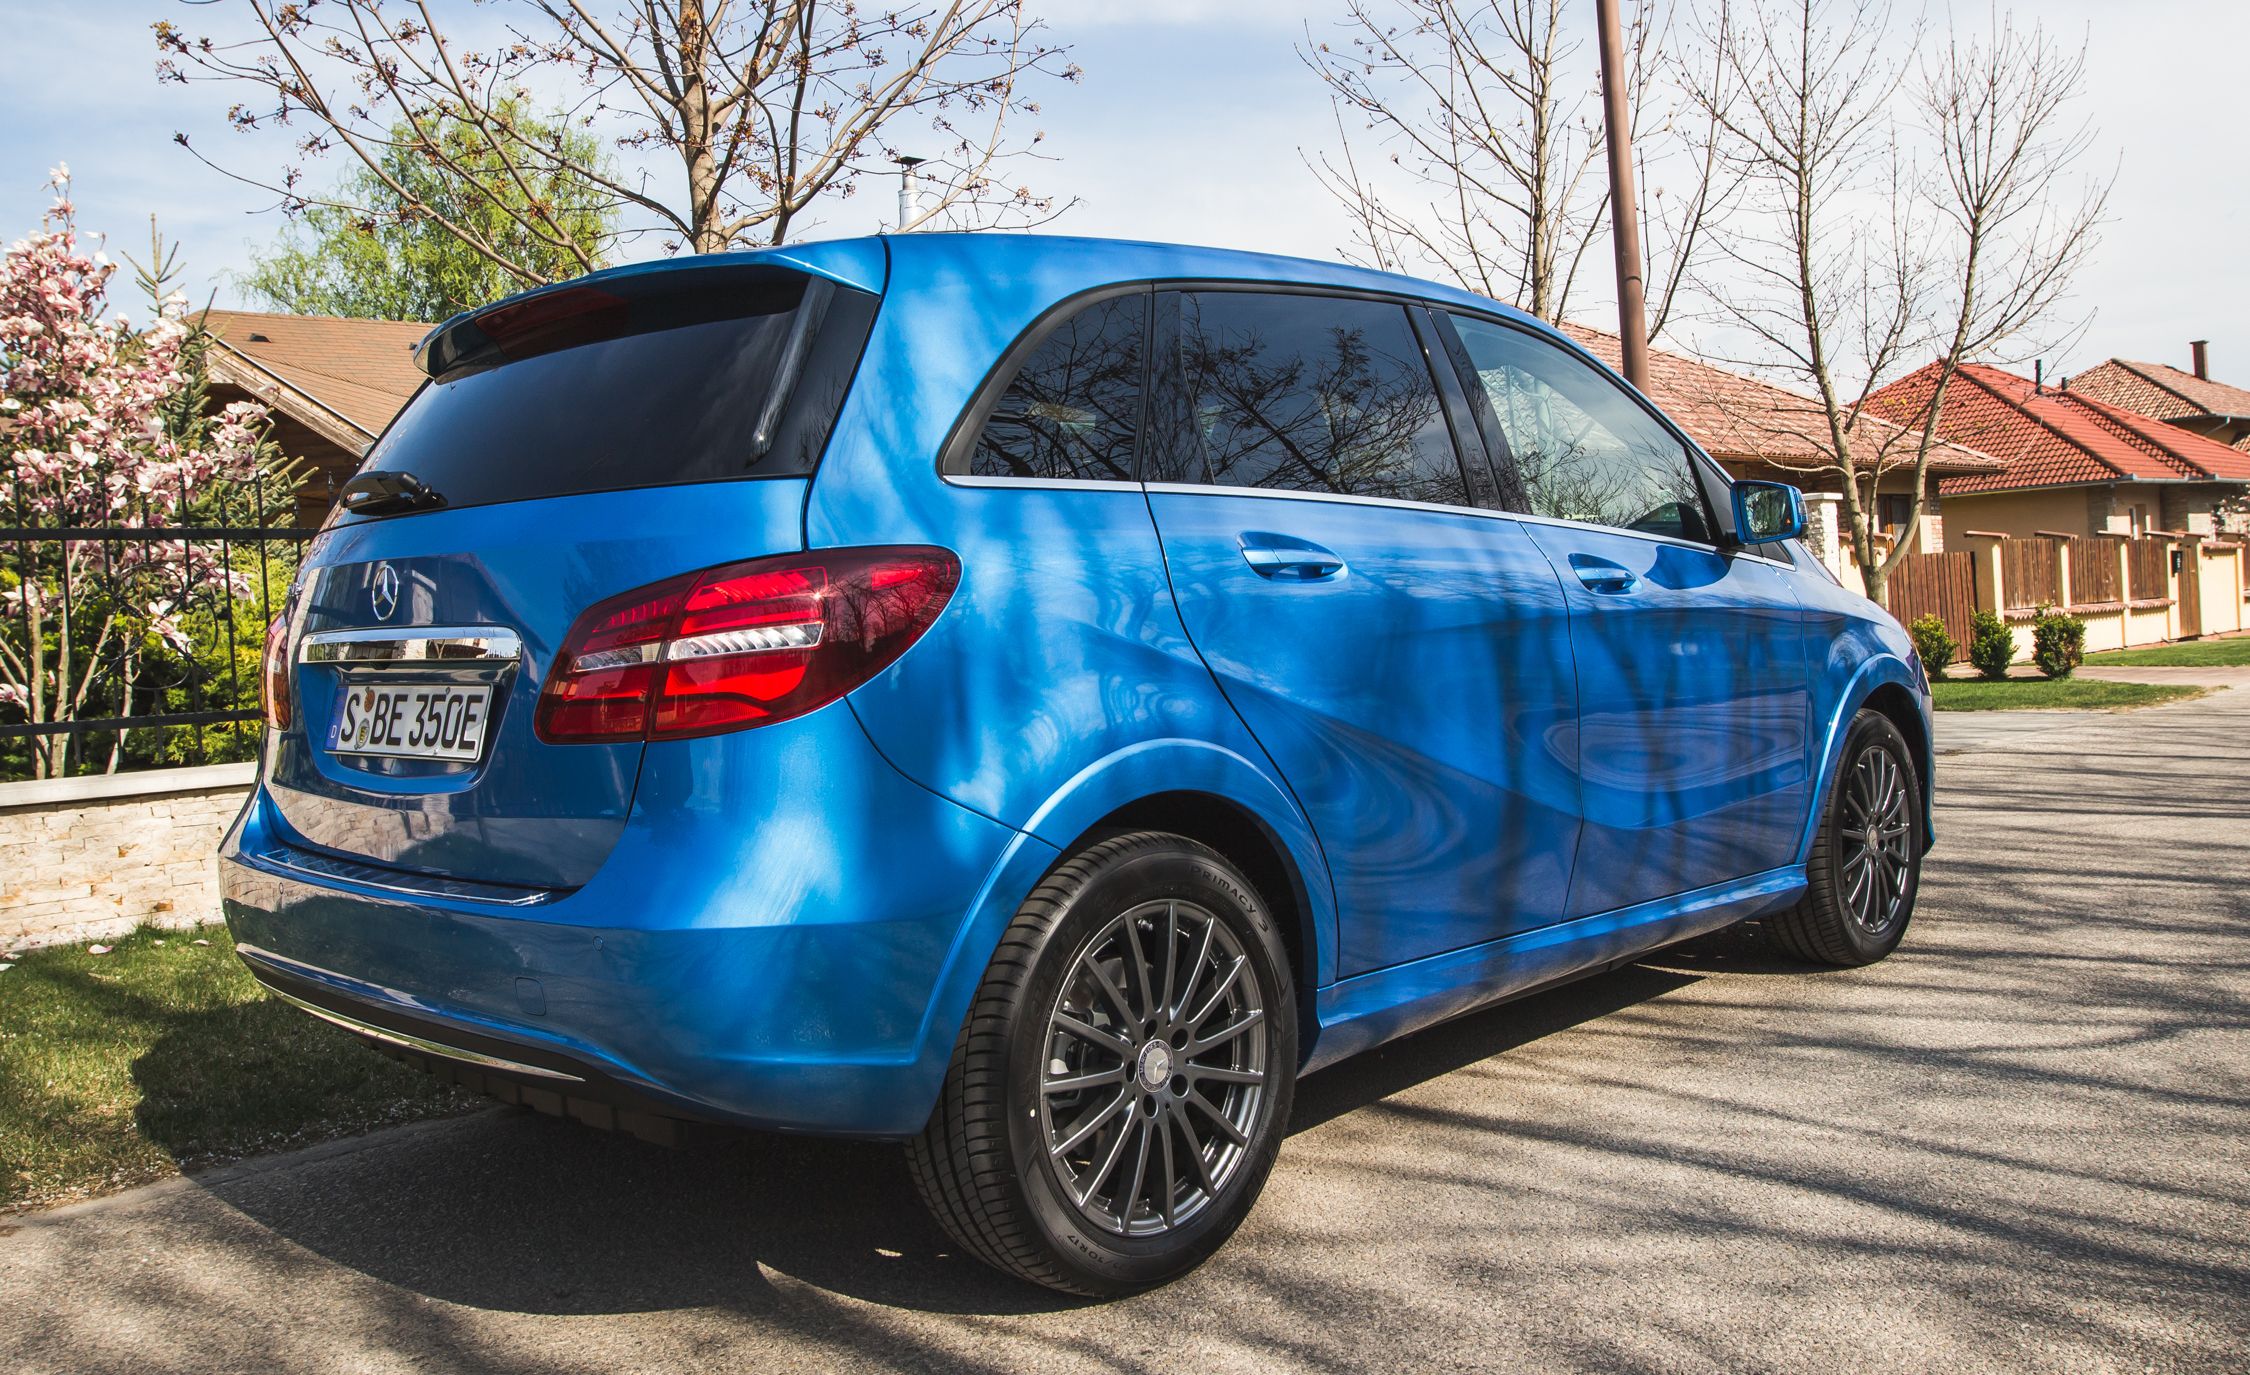 2017 Mercedes Benz B Class Ev Exterior View Side And Rear (View 18 of 24)